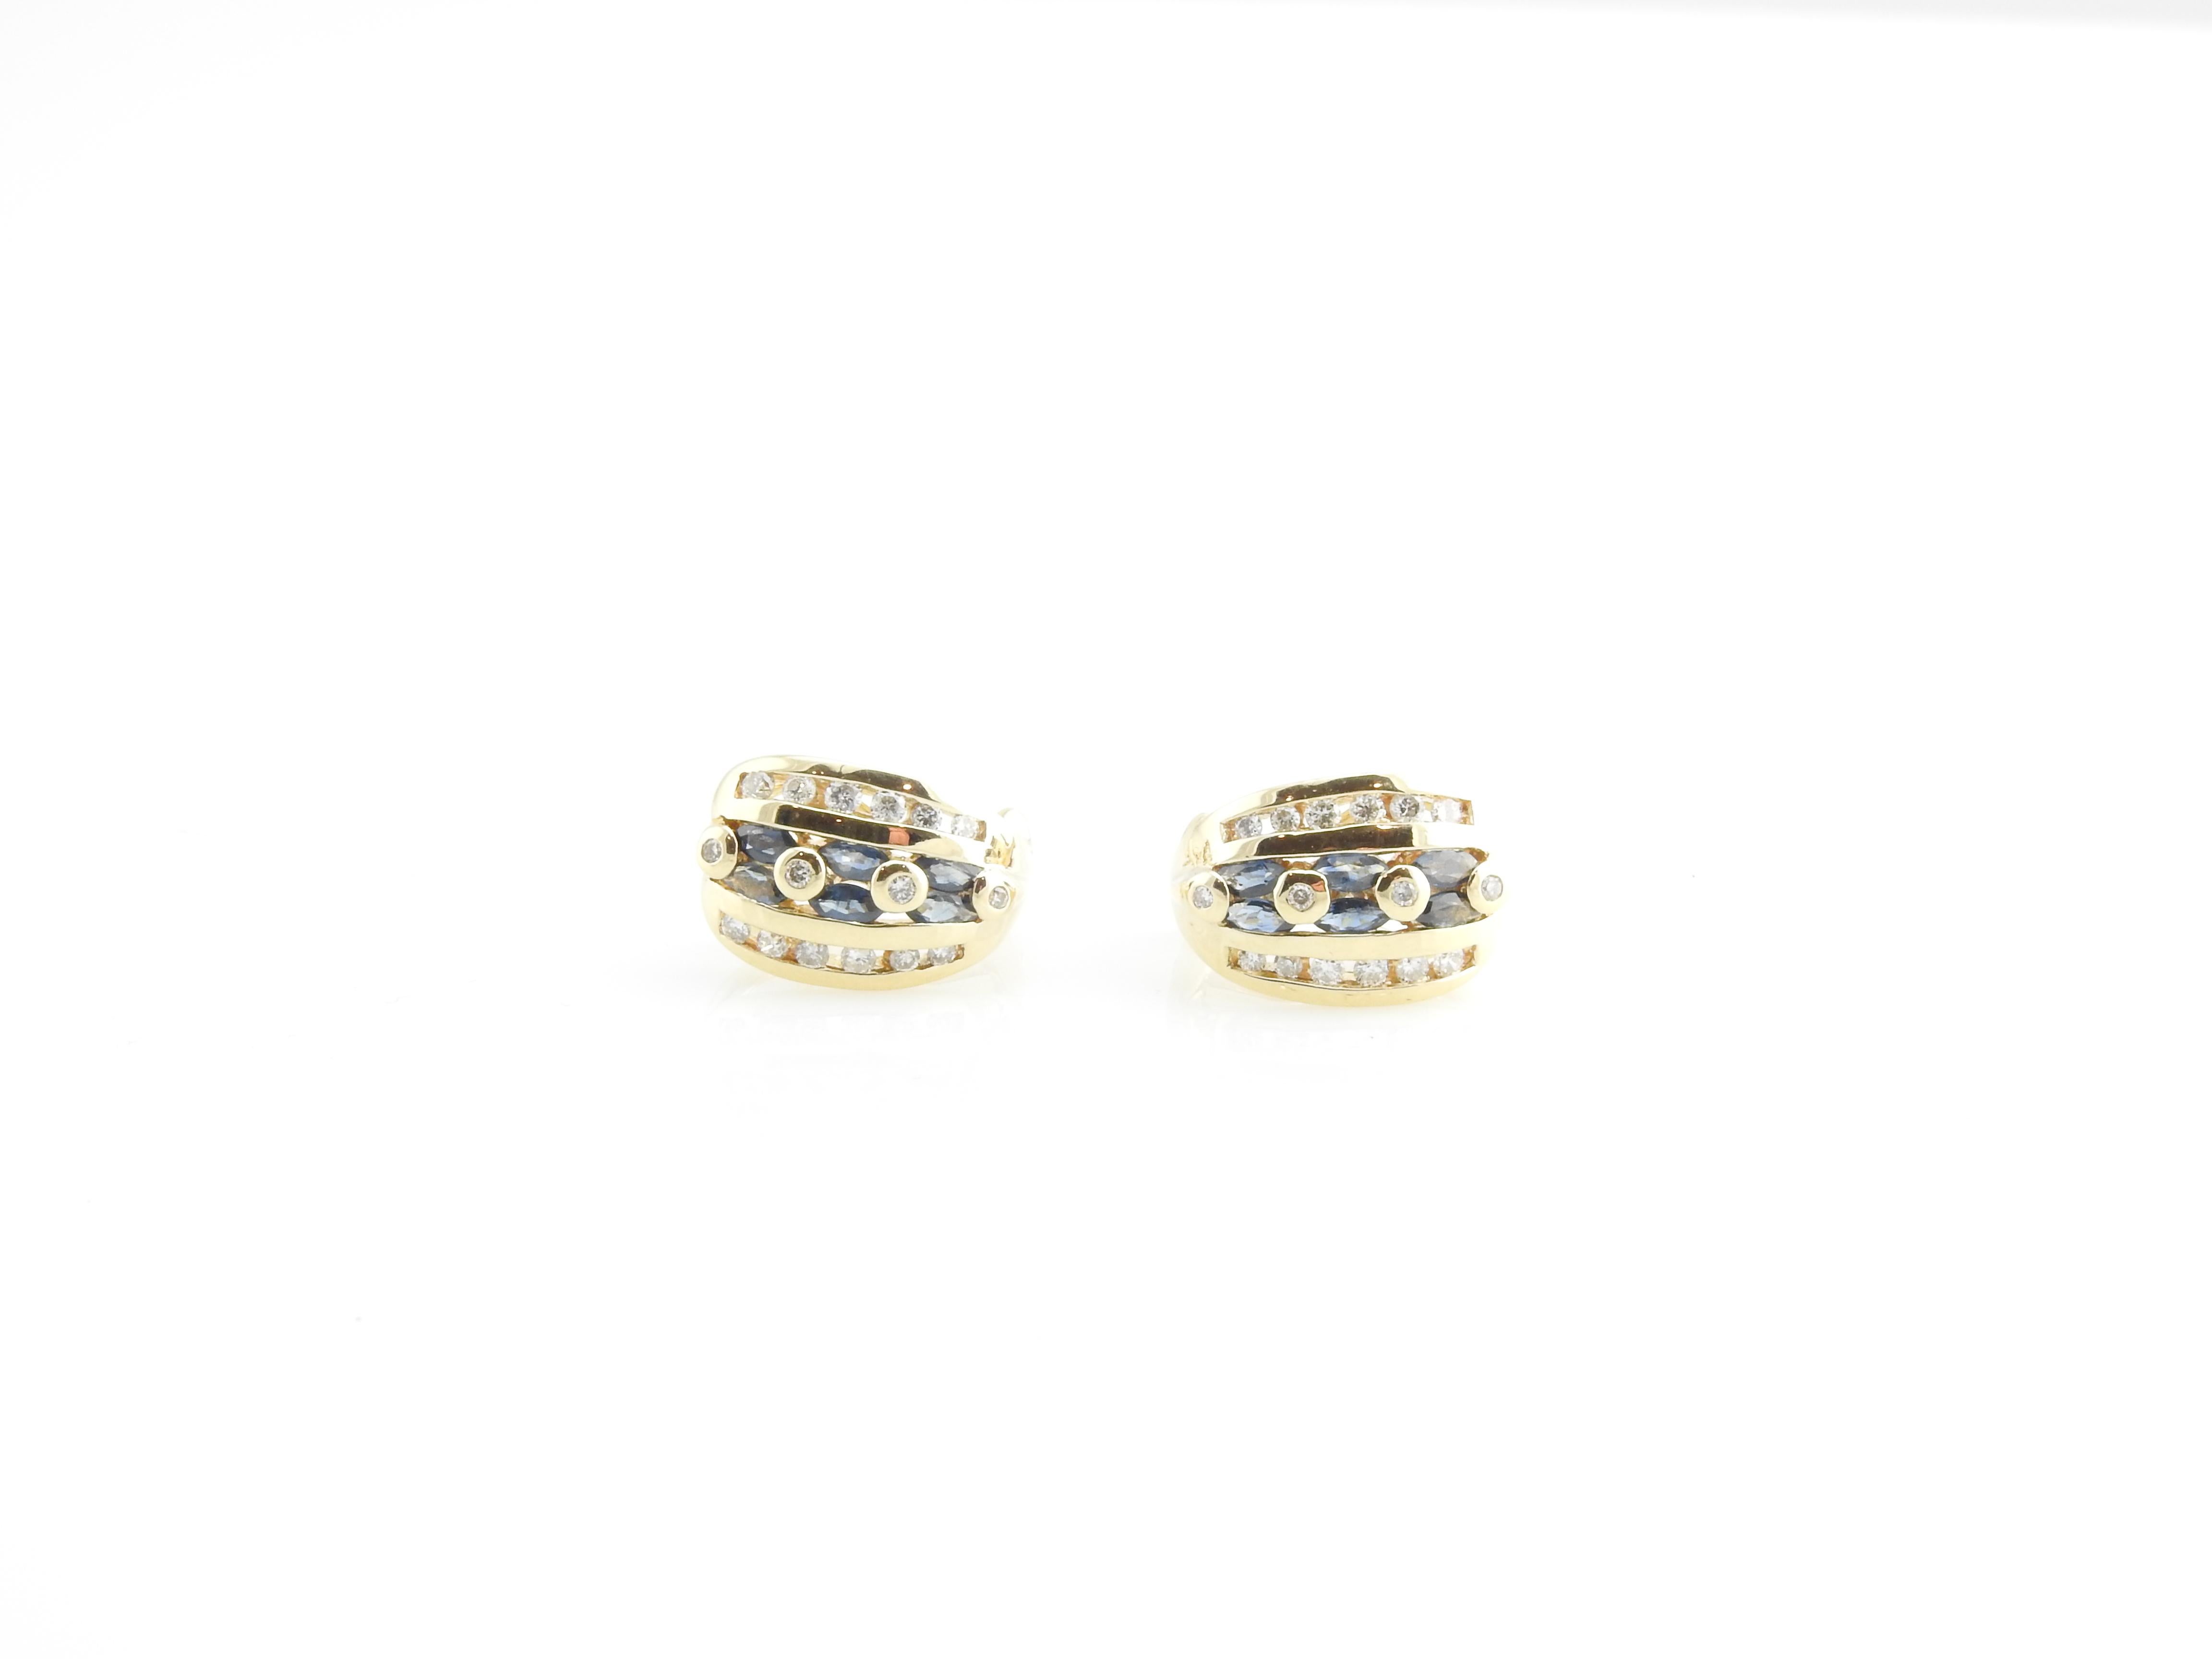 Vintage 14 Karat Yellow Gold Natural Sapphire and Diamond Earrings-

These lovely earrings each features three round natural sapphires and 16 round brilliant cut diamonds set in beautifully detailed 14K yellow gold.  Hinged closures.

Approximate